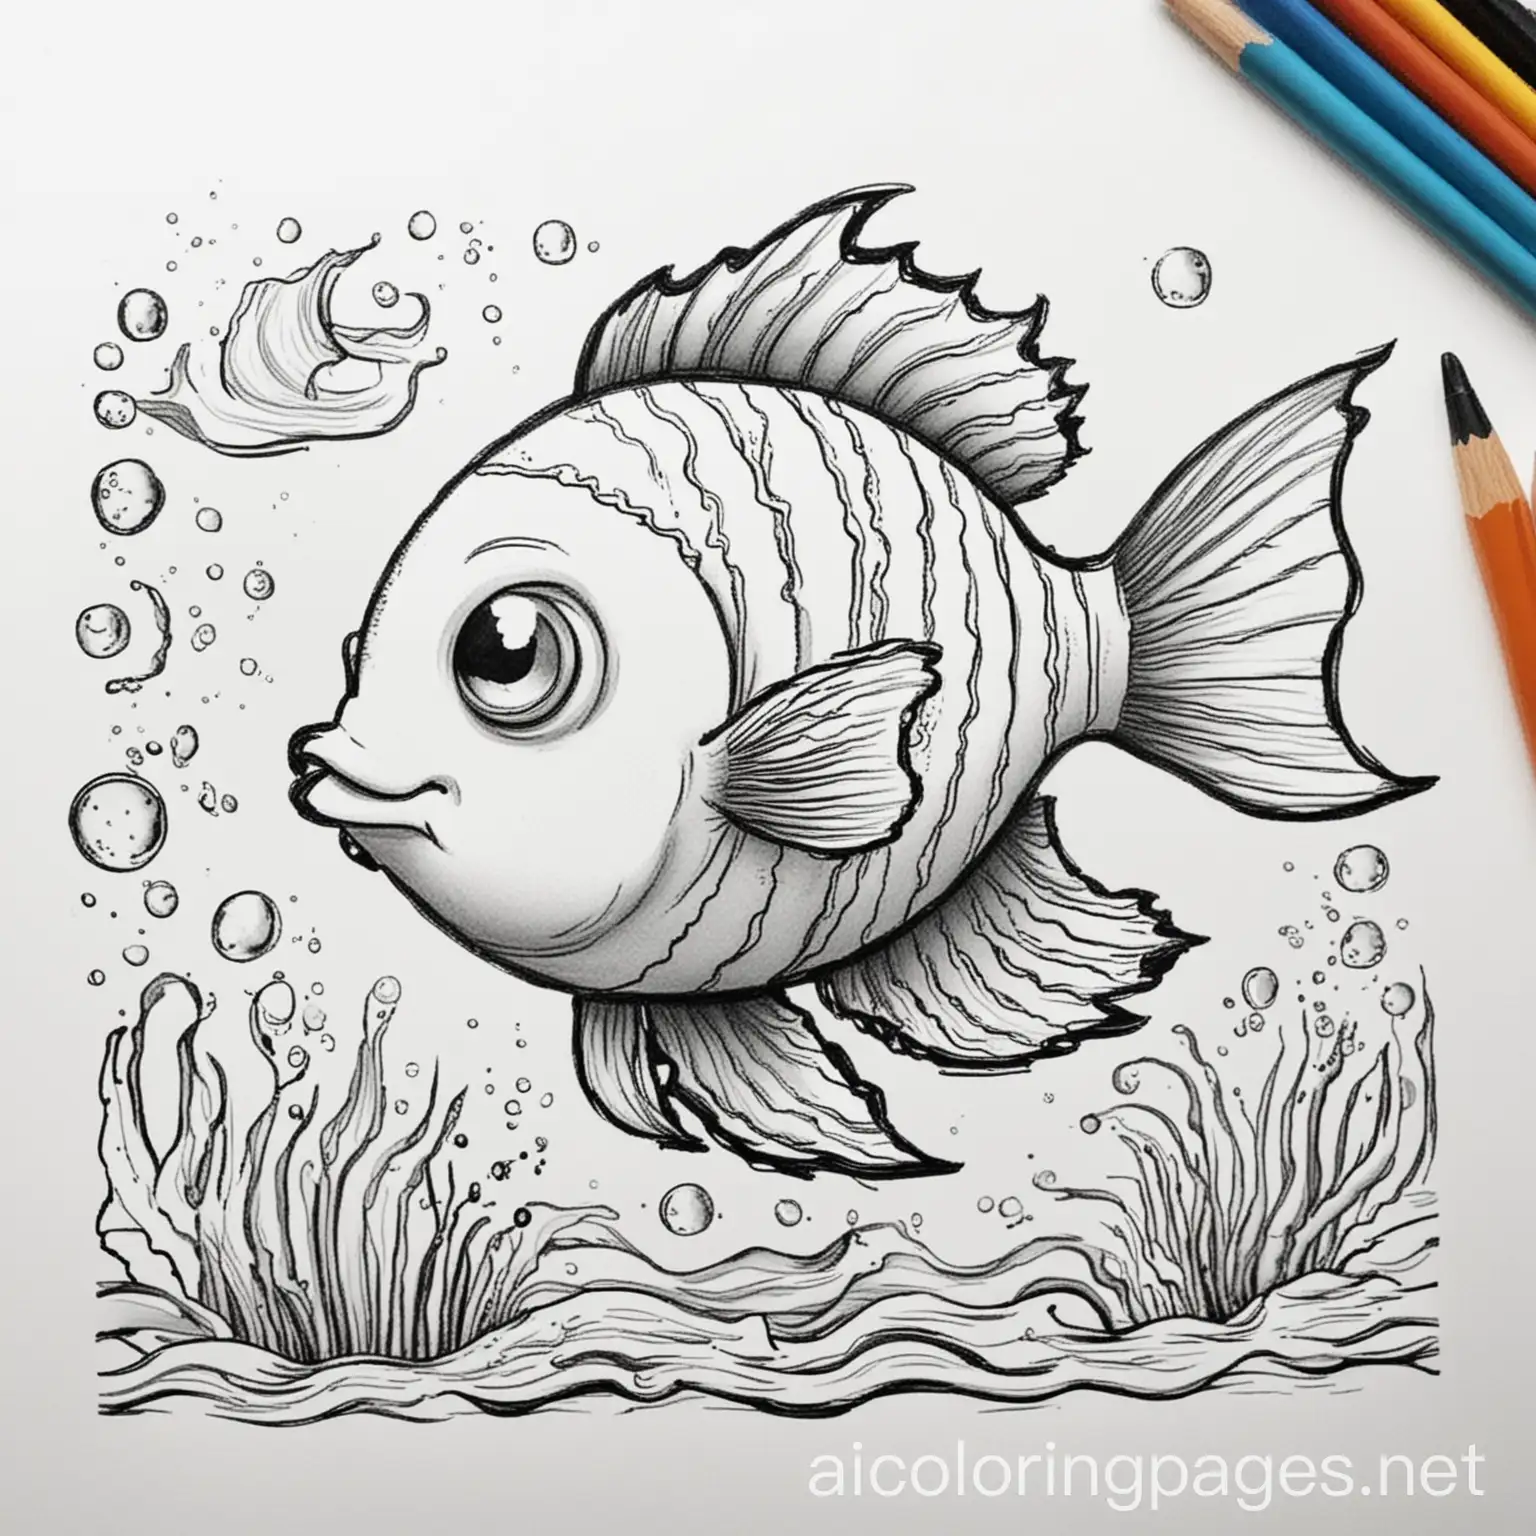 Cartoon-Drawing-School-of-Fish-Coloring-Page